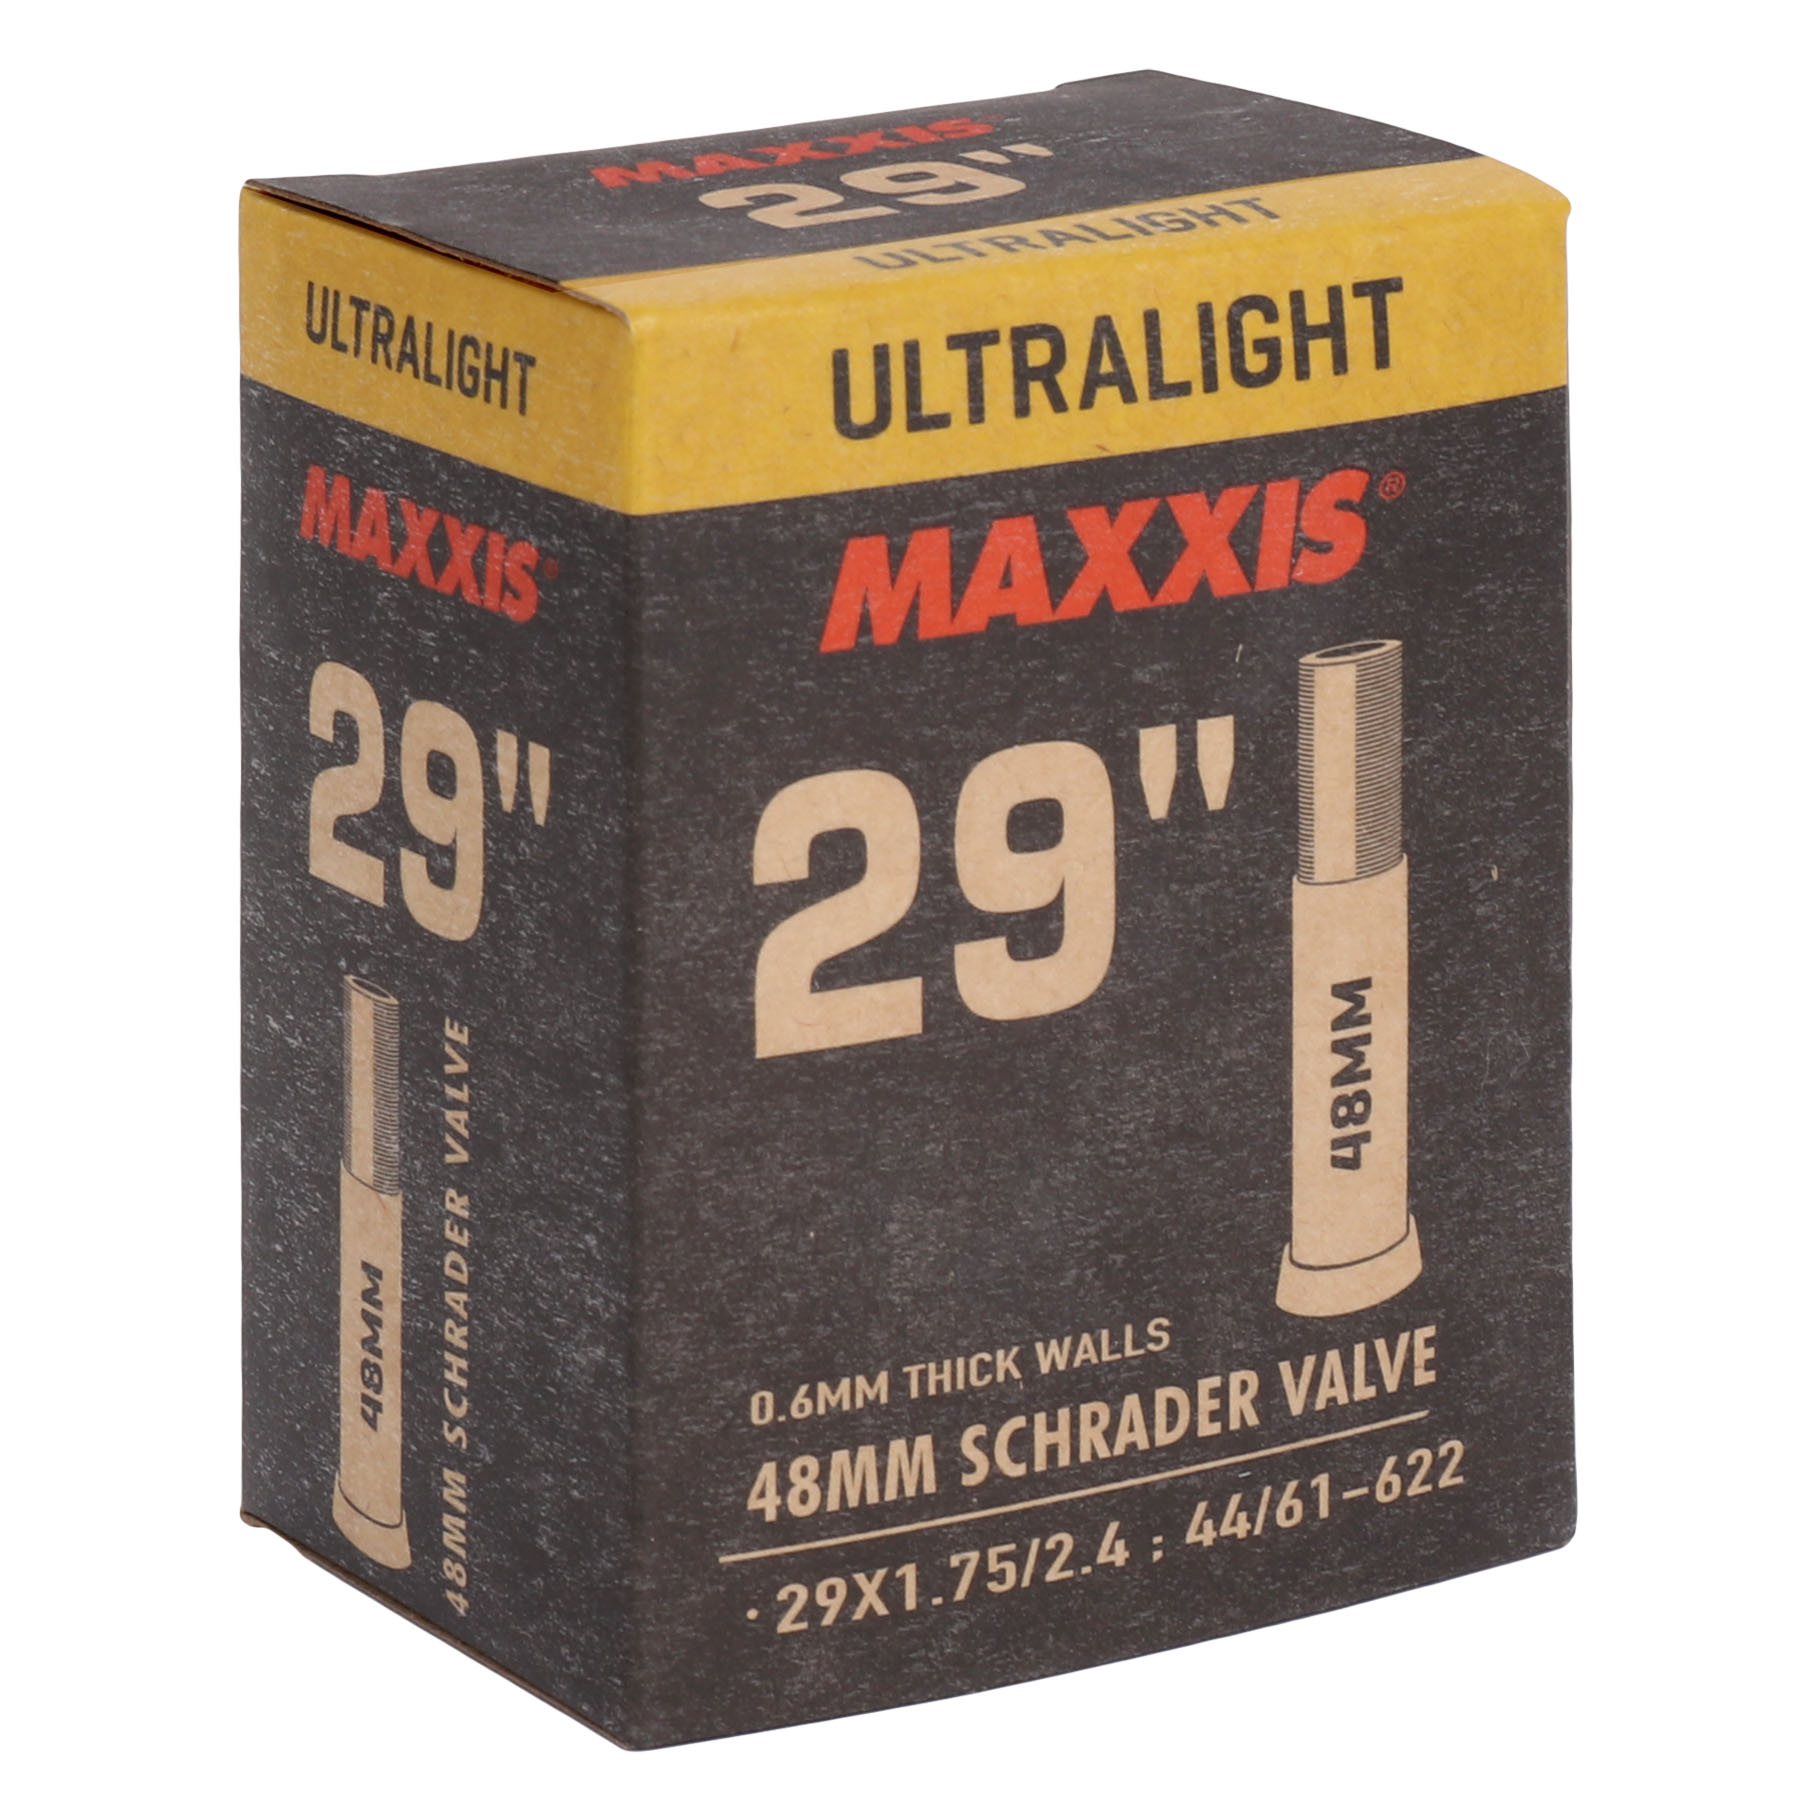 Image of Maxxis UltraLight MTB Tube - 29x1.75-2.40 inches - Schrader - 48mm